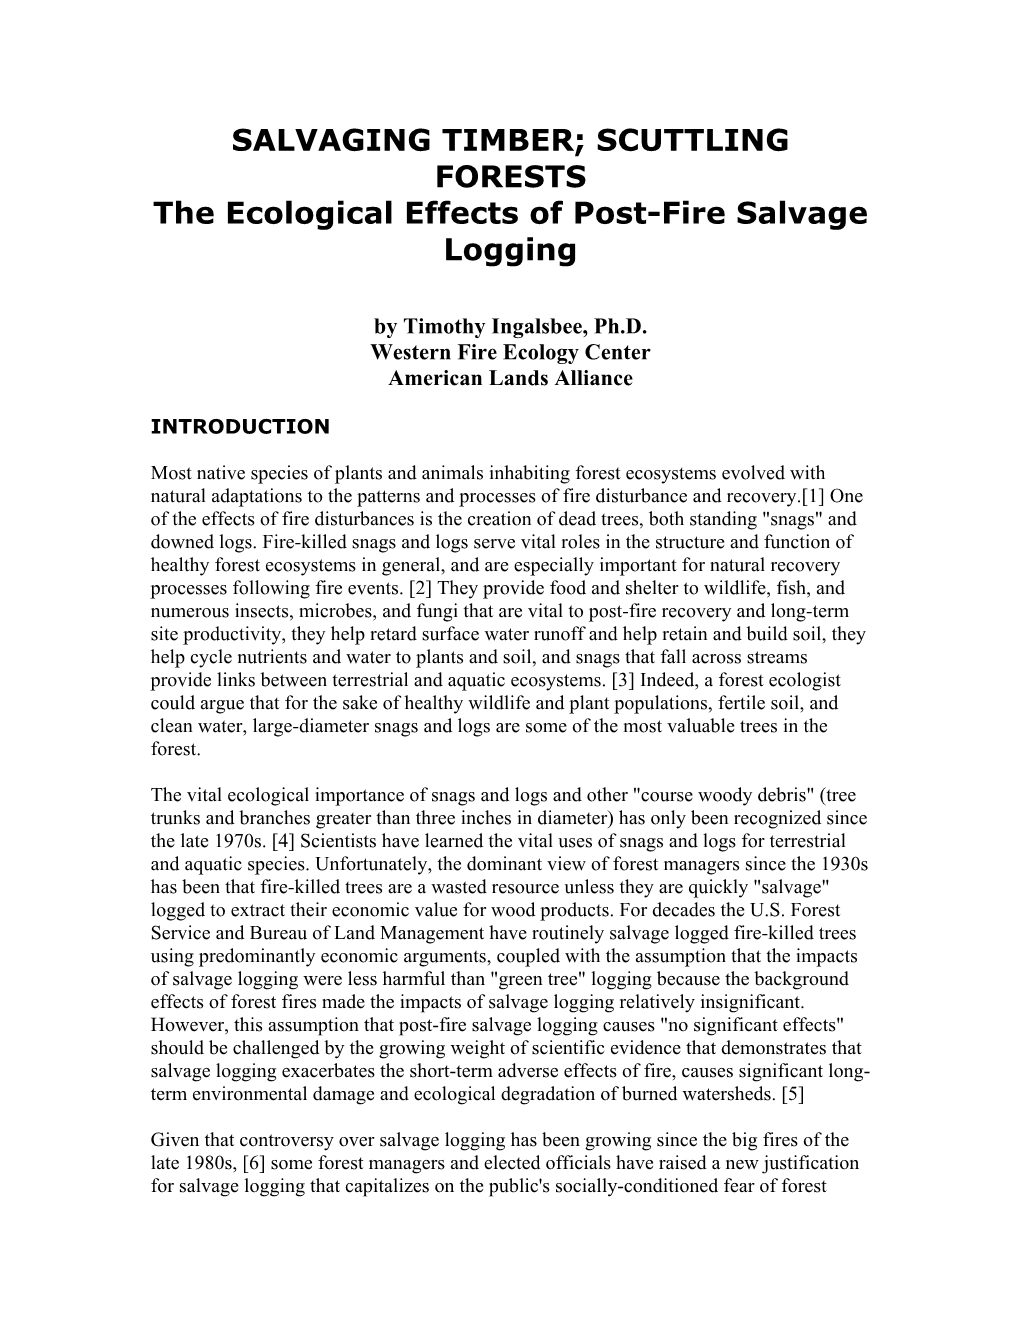 Scuttling Forests: the Ecological Effects of Post-Fire Salvage